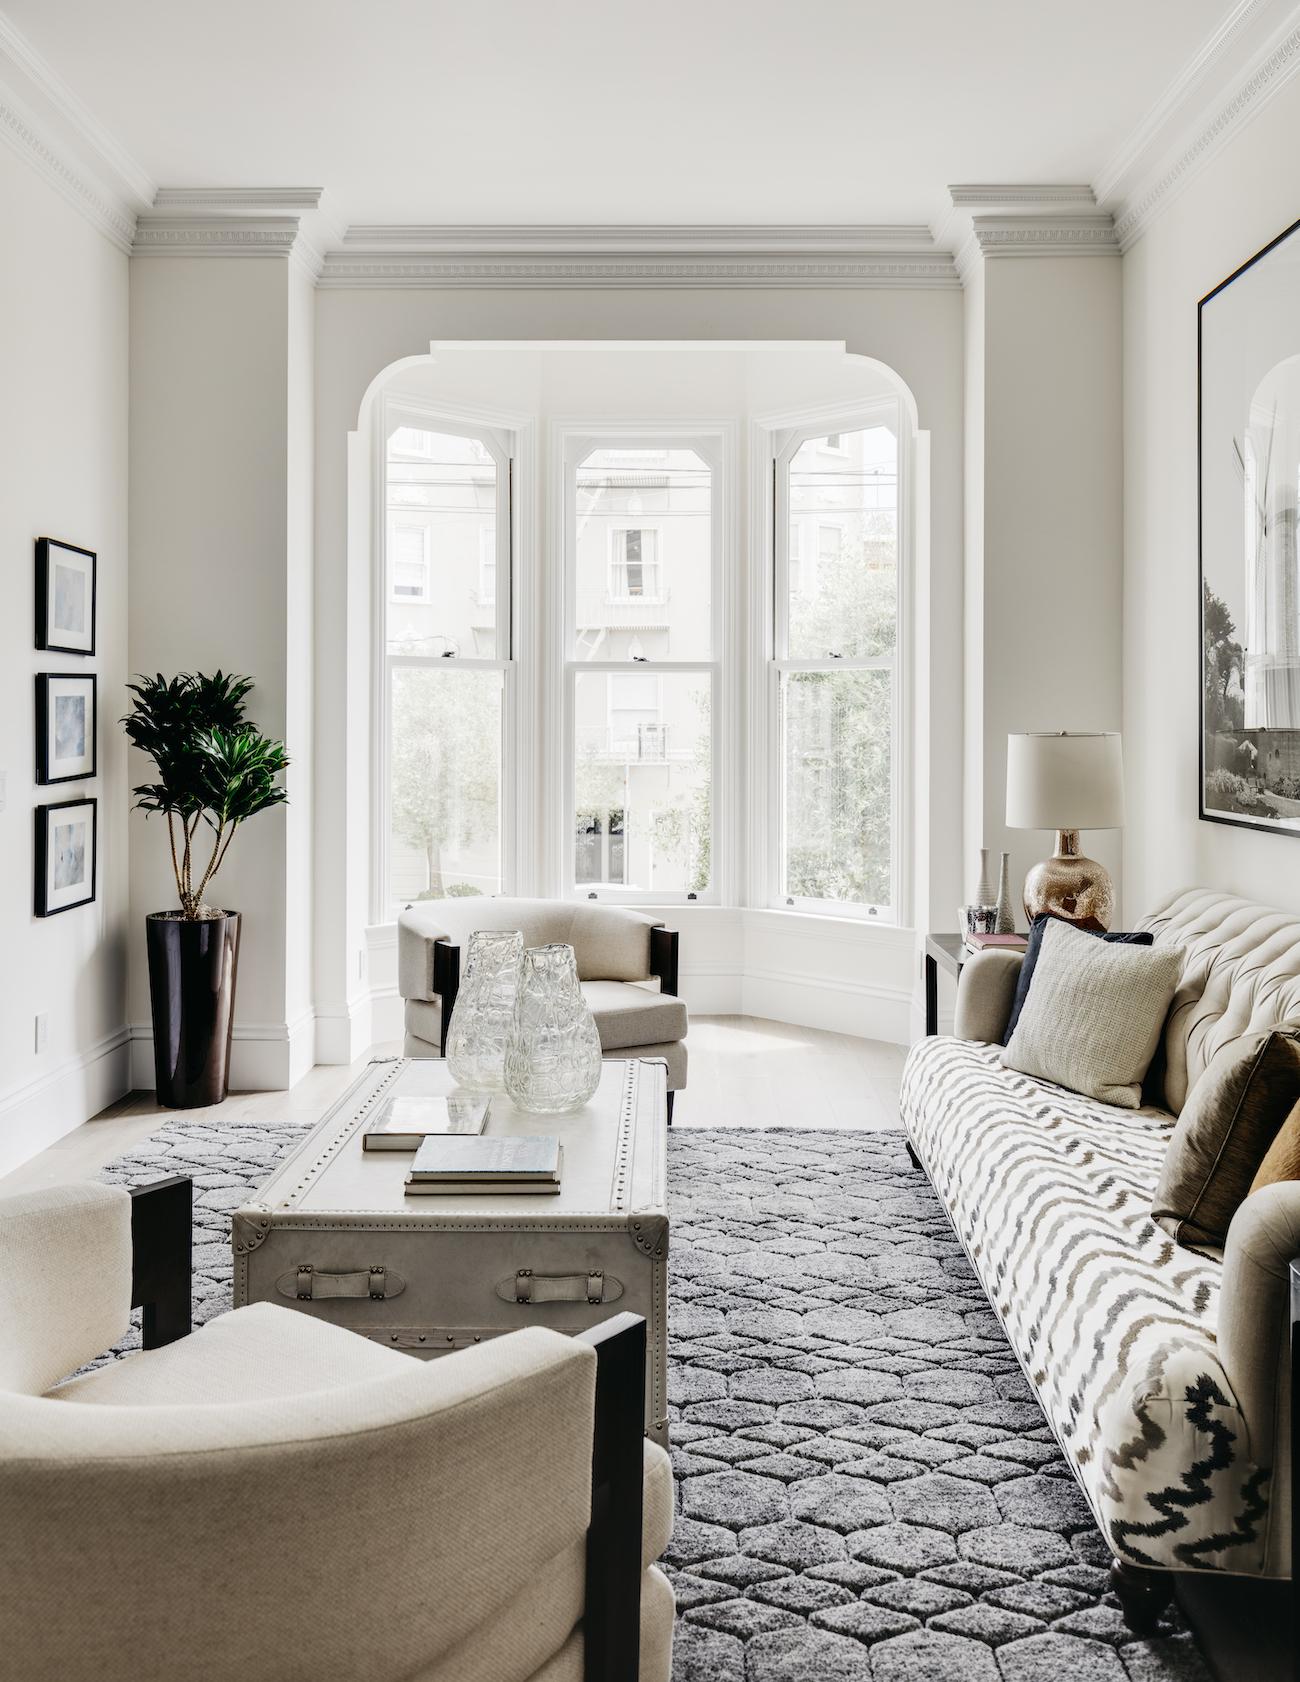 This Victorian House in San Francisco Has Been Given a Chic 21st-Century Update